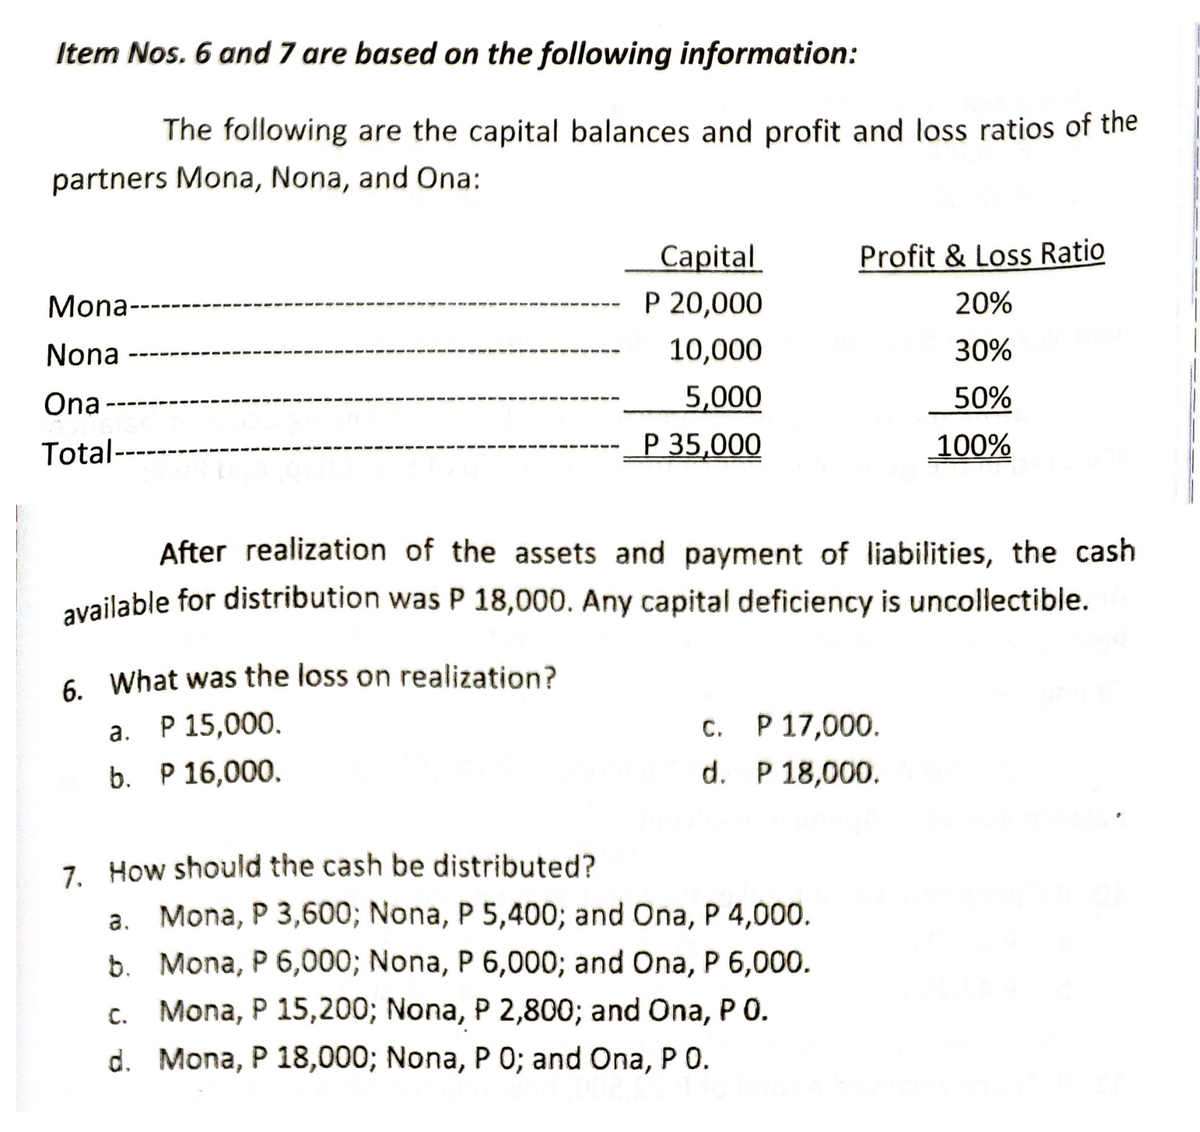 Item Nos. 6 and 7 are based on the following information:
The following are the capital balances and profit and loss ratios of the
partners Mona, Nona, and Ona:
Capital
Profit & Loss Ratio
Mona-
P 20,000
20%
Nona
10,000
30%
Ona-
5,000
50%
Total--
P 35,000
100%
After realization of the assets and payment of liabilities, the cash
available for distribution was P 18,000. Any capital deficiency is uncollectible.
6. What was the loss on realization?
a. P 15,000.
C.
P 17,000.
b. P 16,000.
d. P 18,000.
7. How should the cash be distributed?
b.
a. Mona, P 3,600; Nona, P 5,400; and Ona, P 4,000.
Mona, P 6,000; Nona, P 6,000; and Ona, P 6,000.
c. Mona, P 15,200; Nona, P 2,800; and Ona, P O.
d. Mona, P 18,000; Nona, P 0; and Ona, PO.